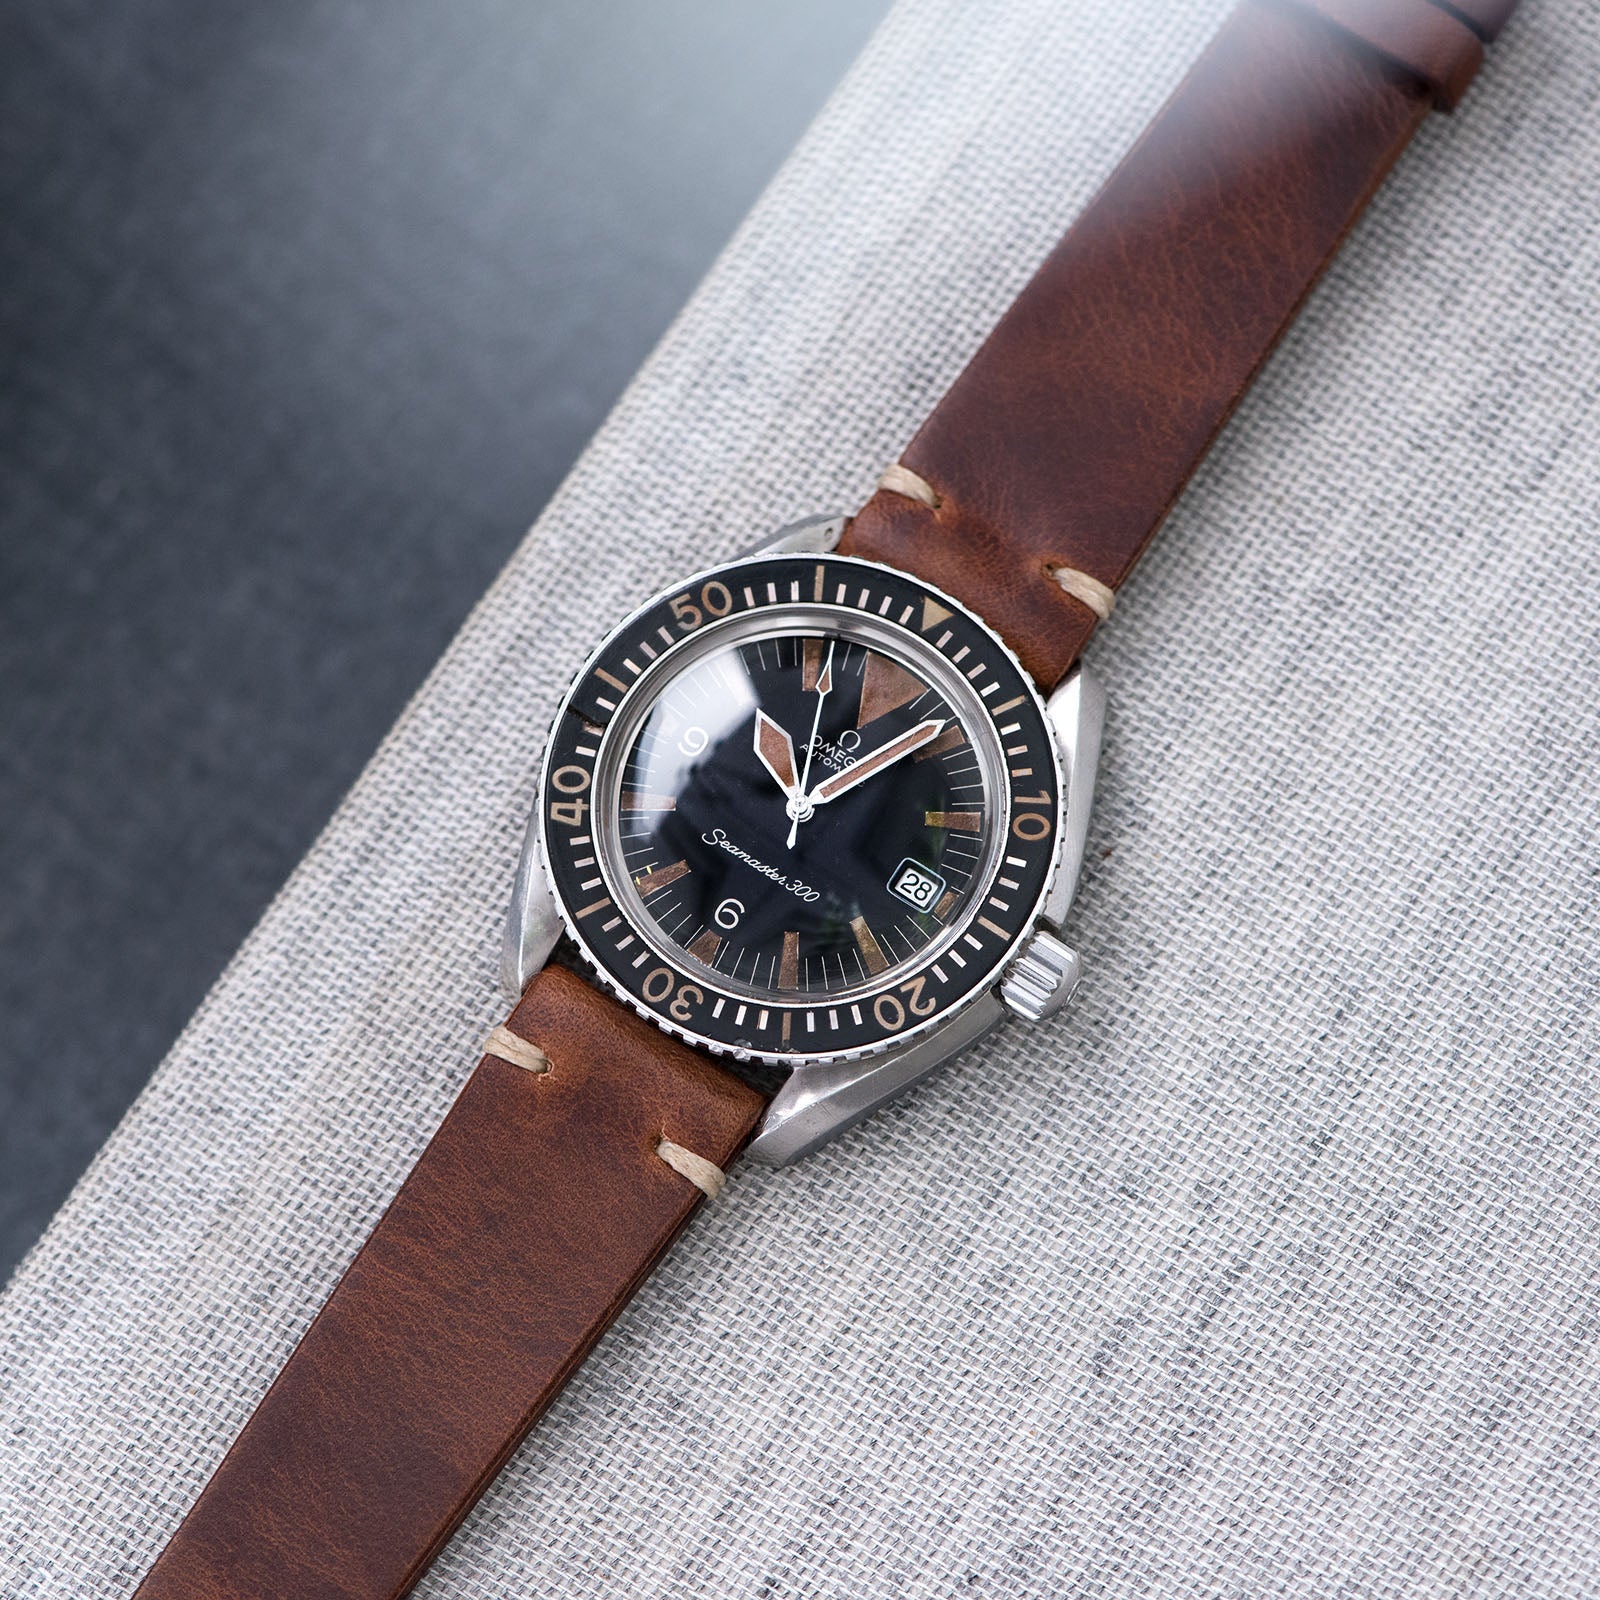 Bulang and Sons_Strap Guide_The omega SM 300 Seamaster_Siena Brown Leather Watch Strap